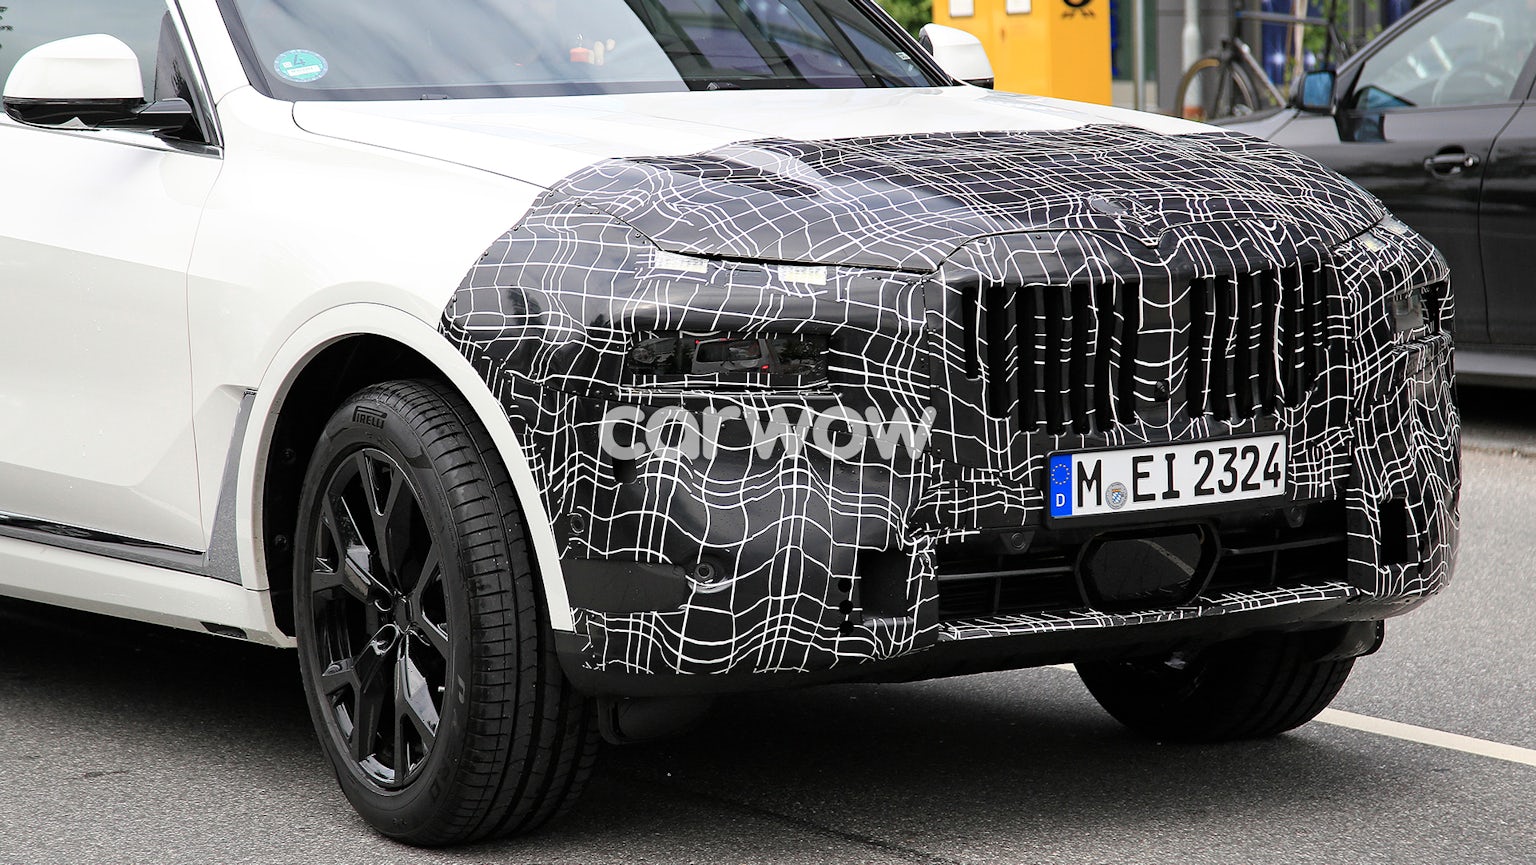 New 2022 BMW X7 facelift spotted: price, specs and release date | carwow